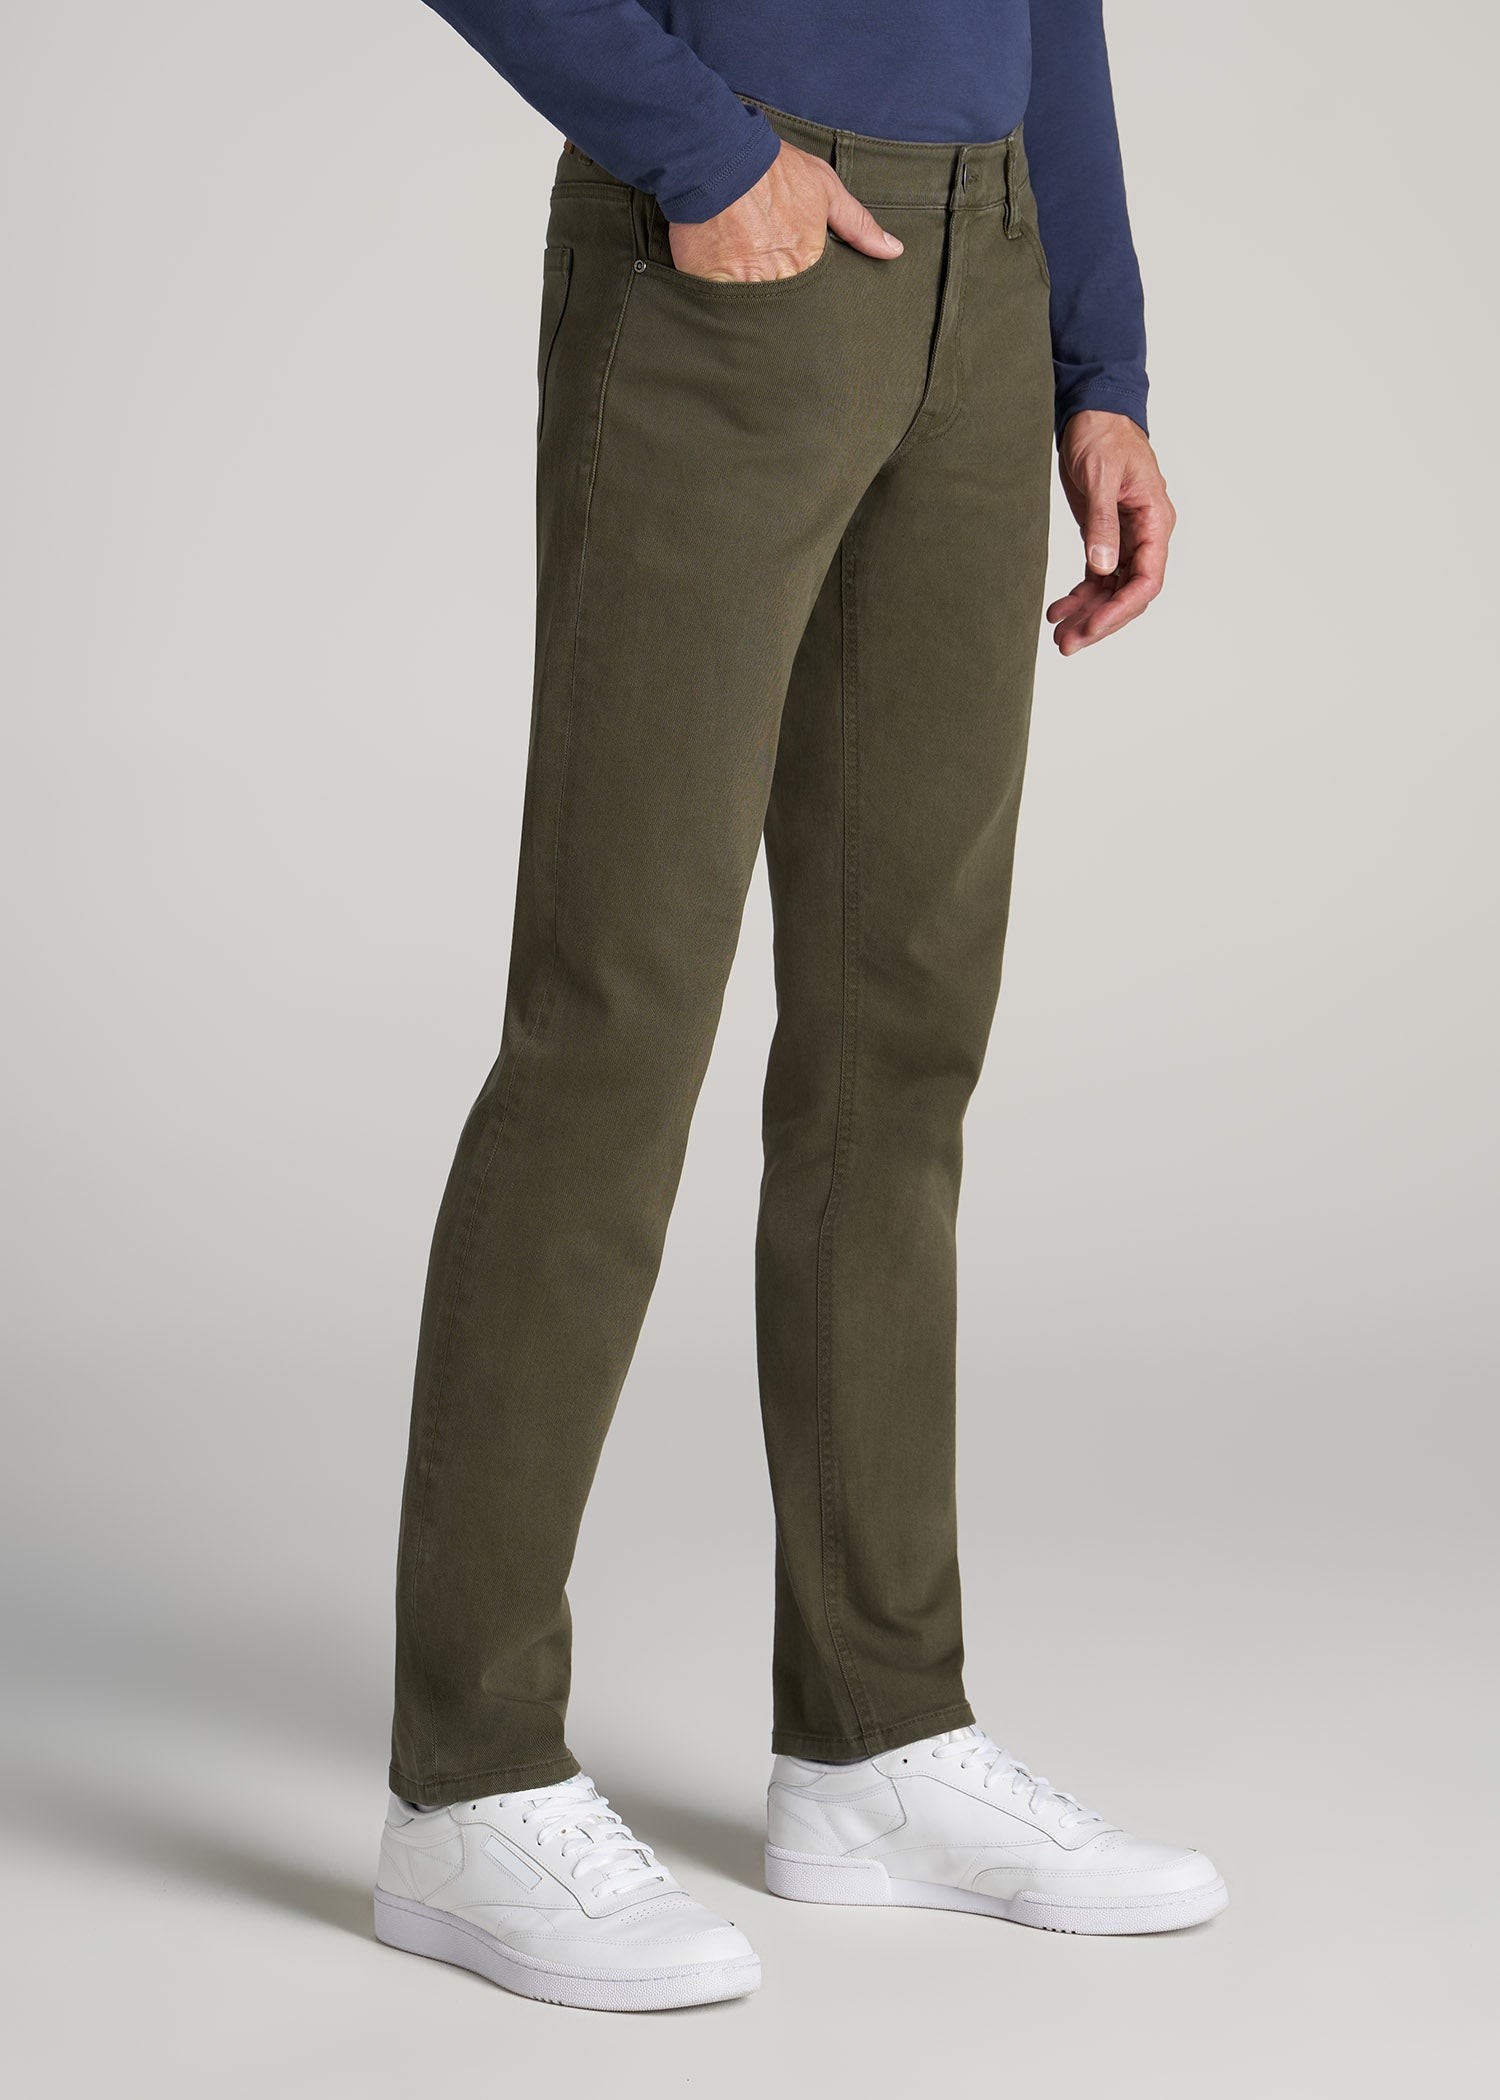       American-Tall-Men-Carman-Tapered-Fit-Jeans-Olive-Green-Wash-side